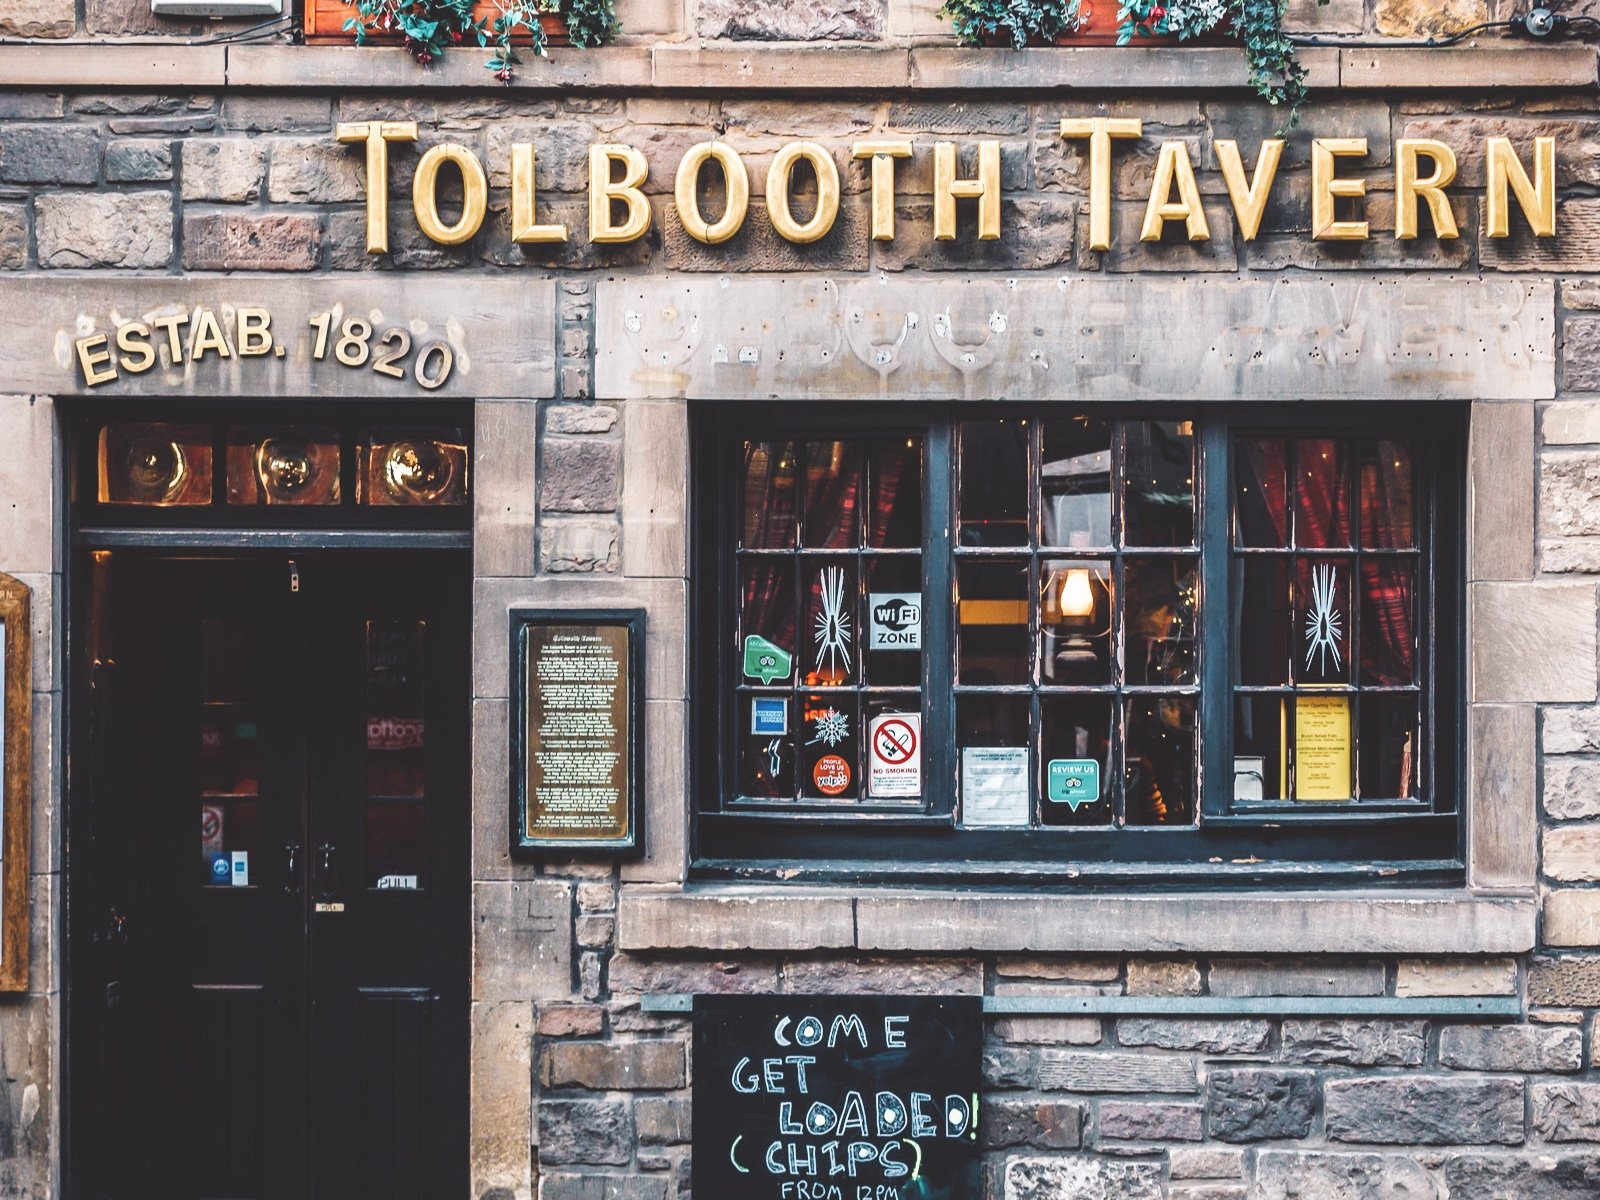 Tolbooth Tavern, one of nine leases in Edinburgh being offered by&nbsp;Star Pubs &amp; Bars